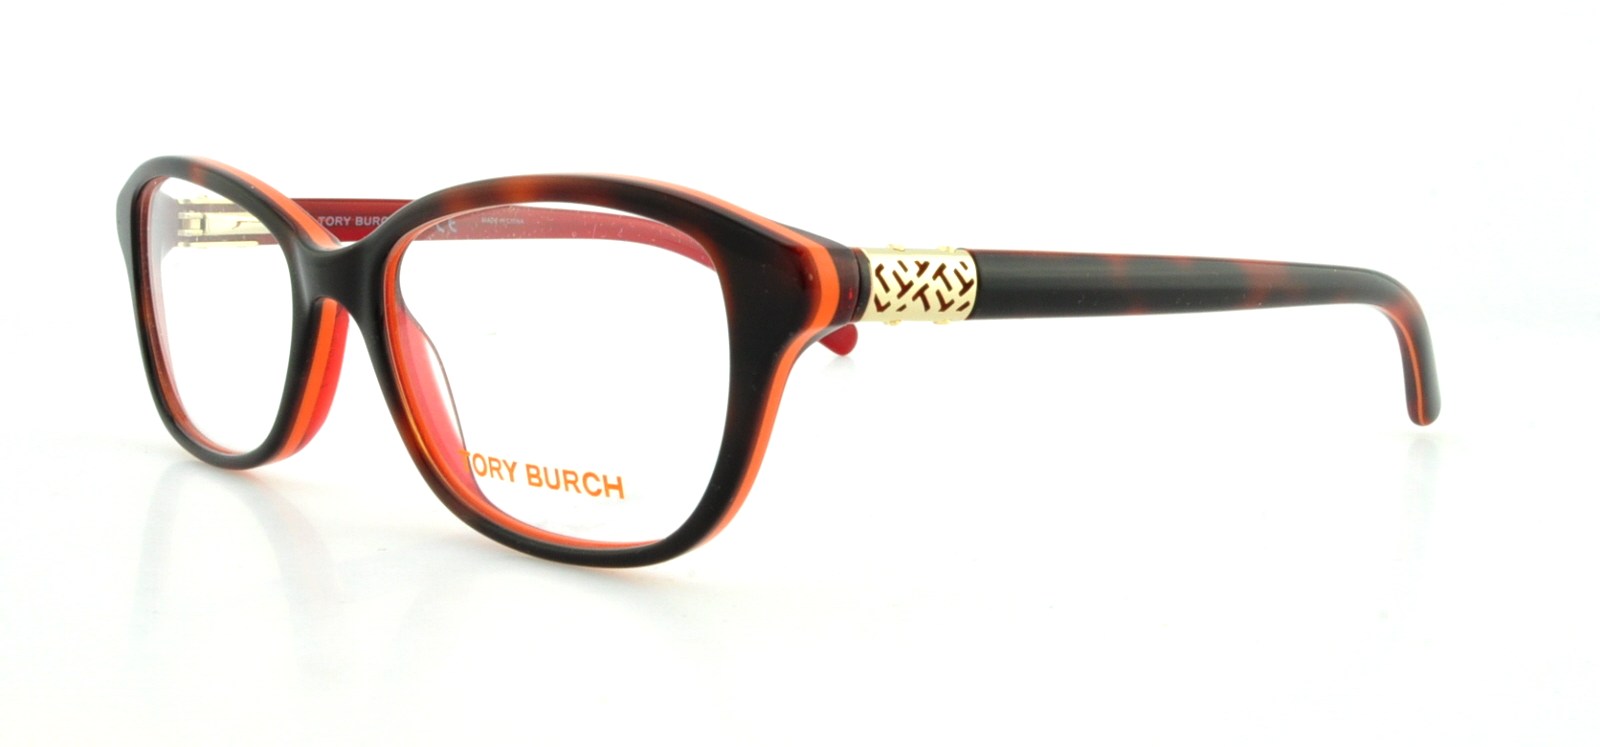 Picture of Tory Burch Eyeglasses TY2042